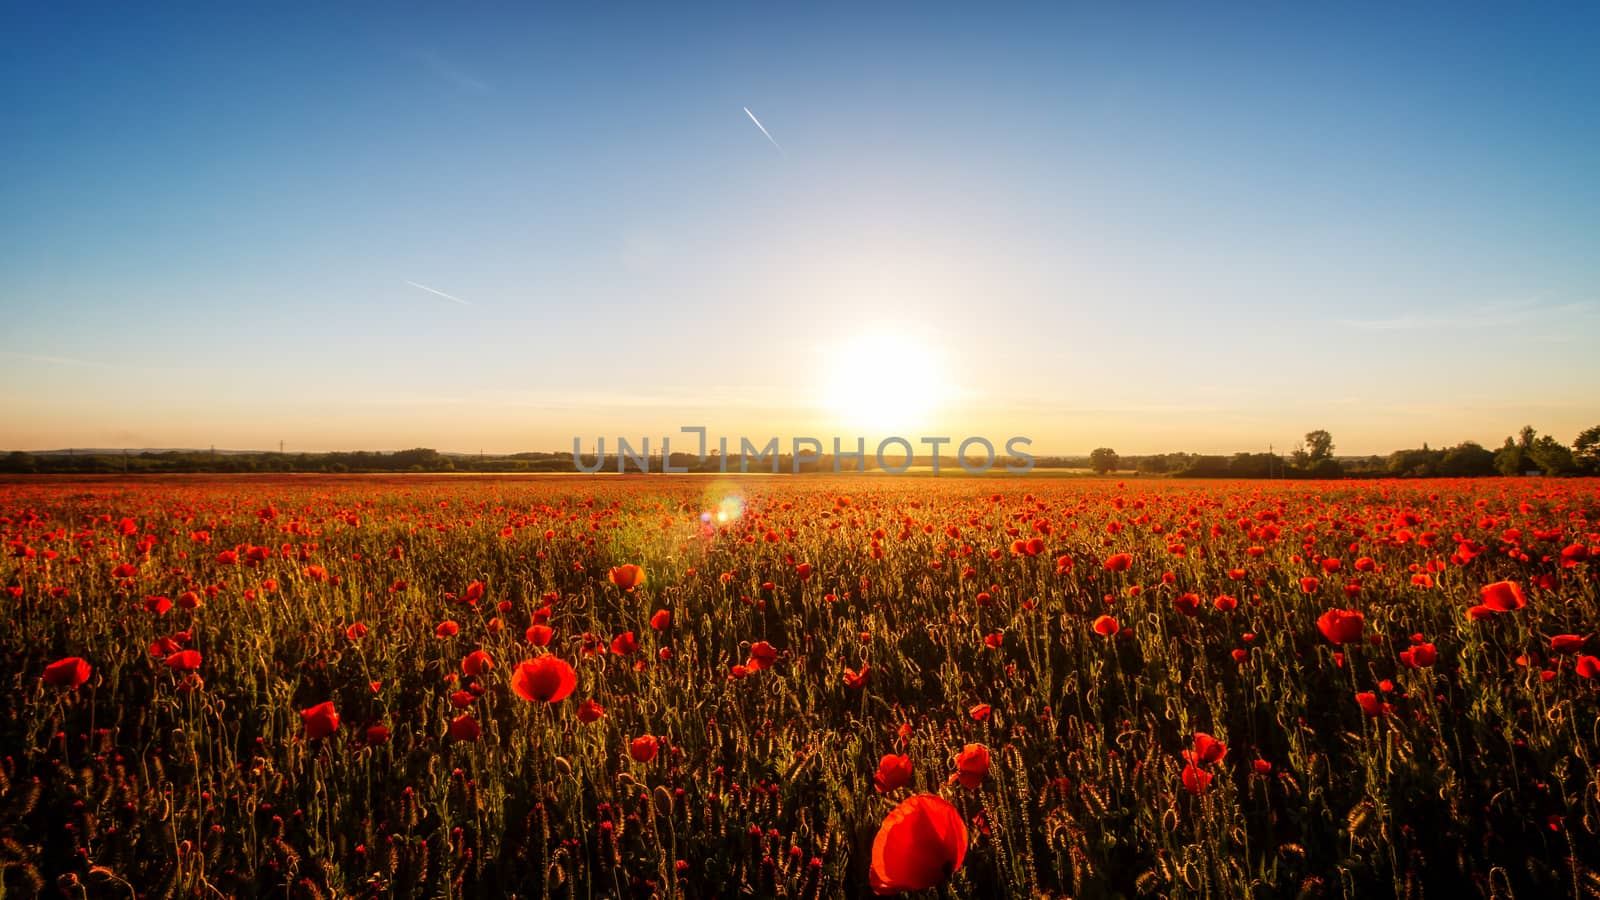 Sunset with poppies by Digoarpi